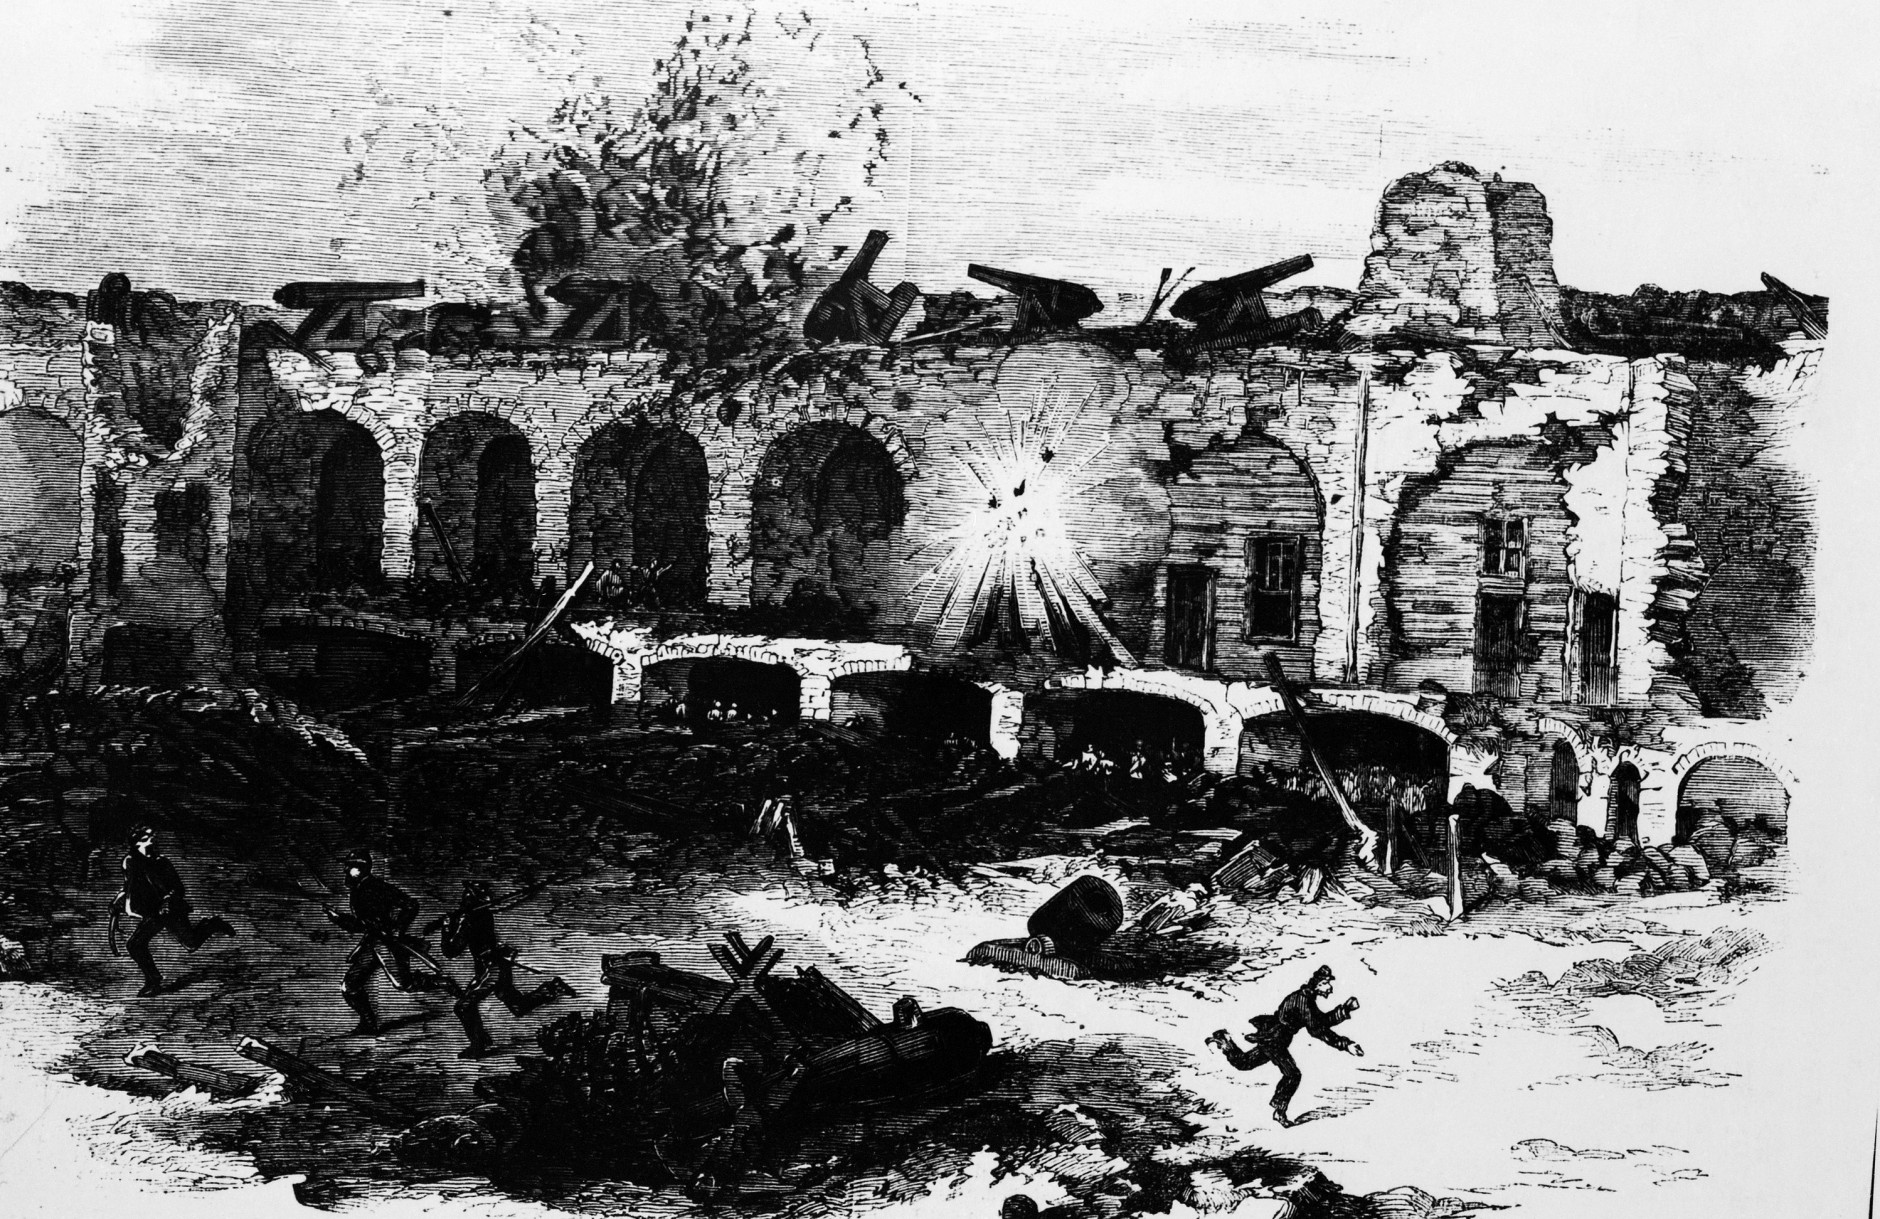 This is Fort Sumter, S.C., after bombardment from Morris Island, April 1861. (AP Photo)